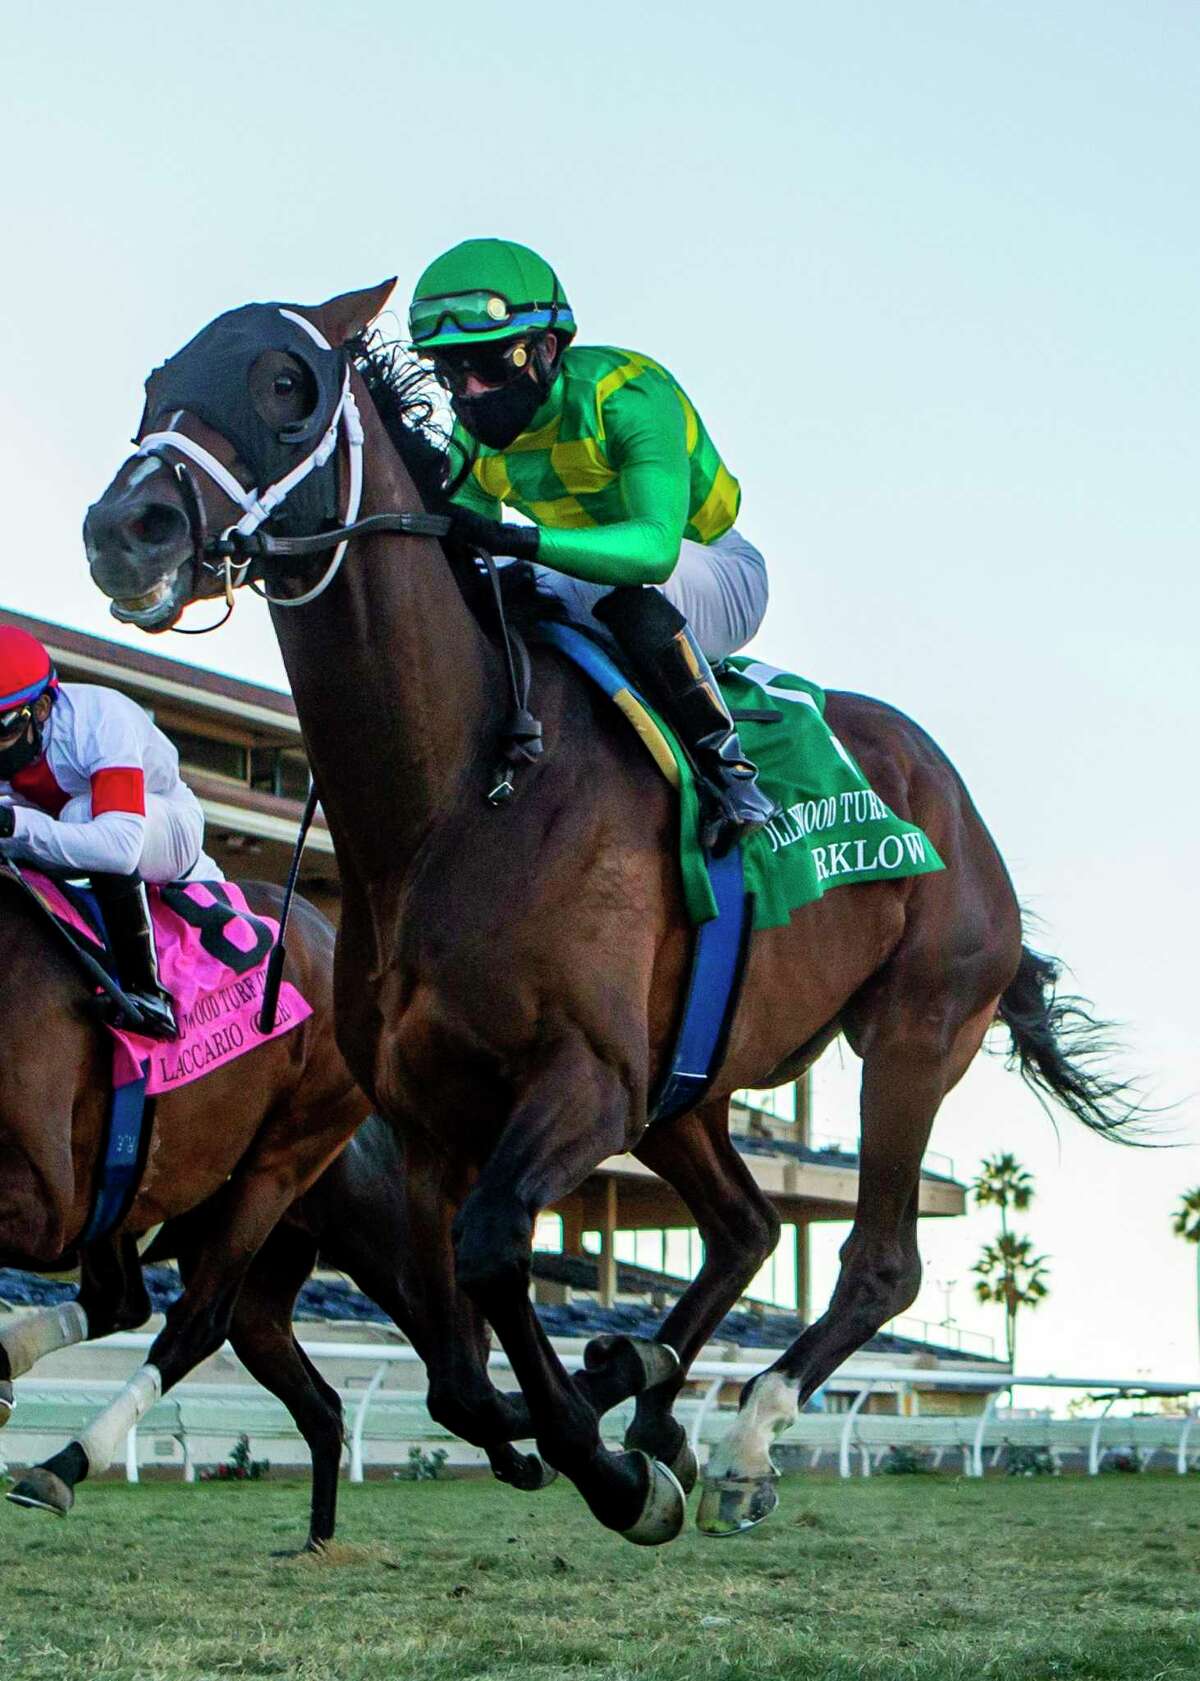 Arklow and jockey Joel Rosario win the Hollywood Turf Cup horse race on Friday in Del Mar, Calif.